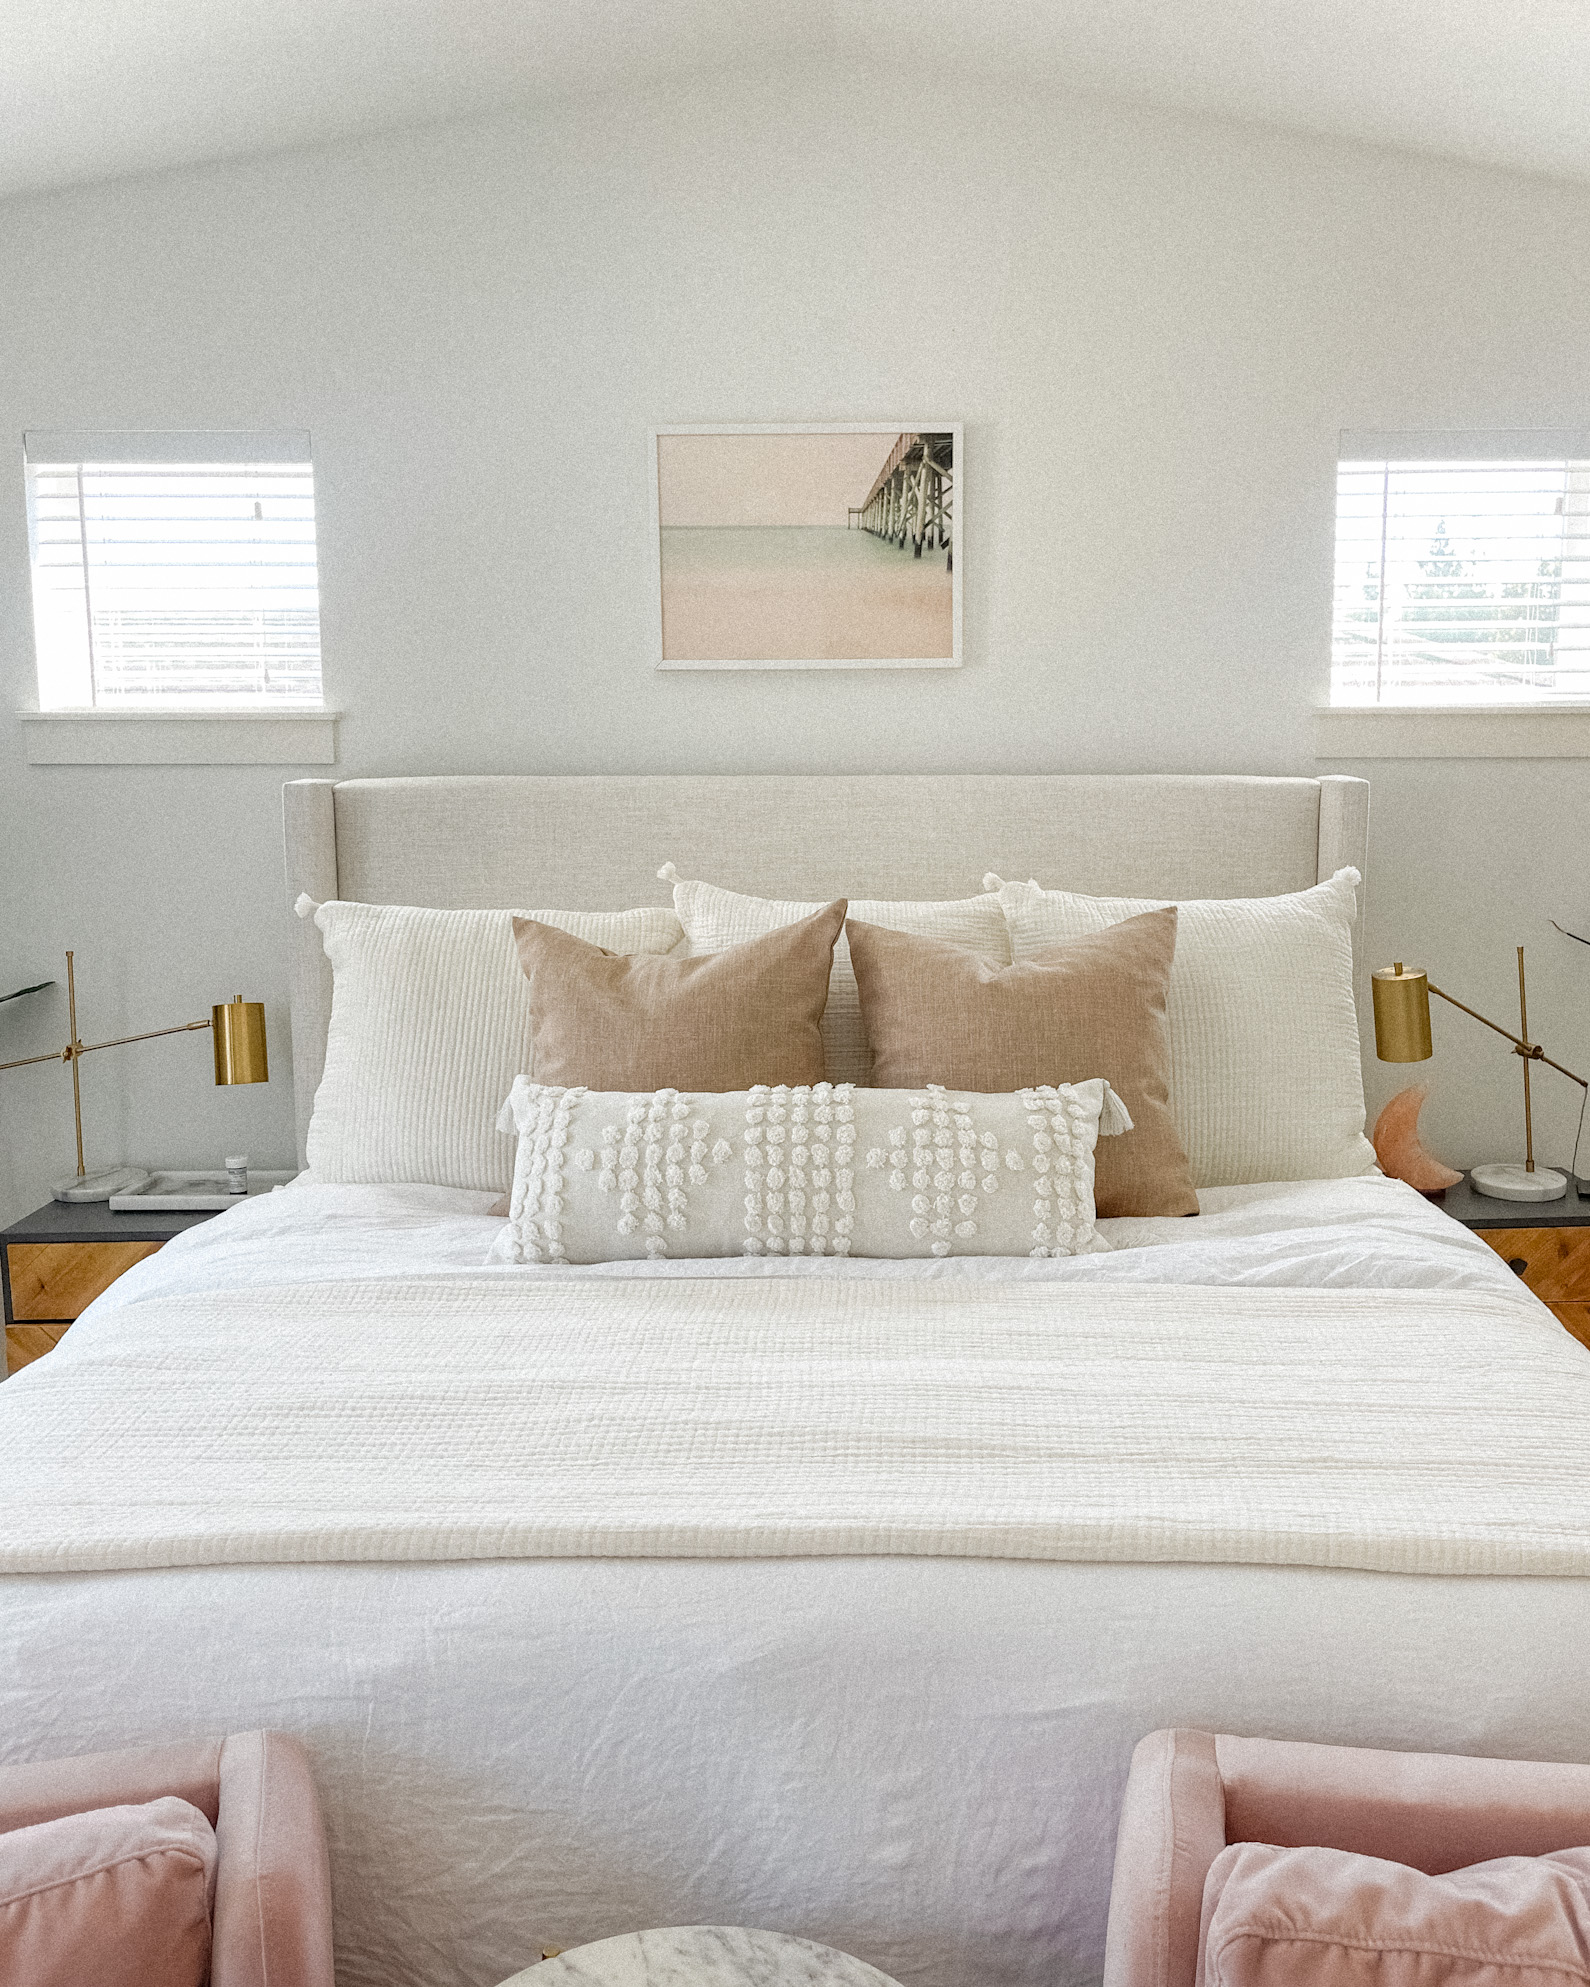 How To Arrange Pillows On A King Bed, Arranging Pillows On King Bed